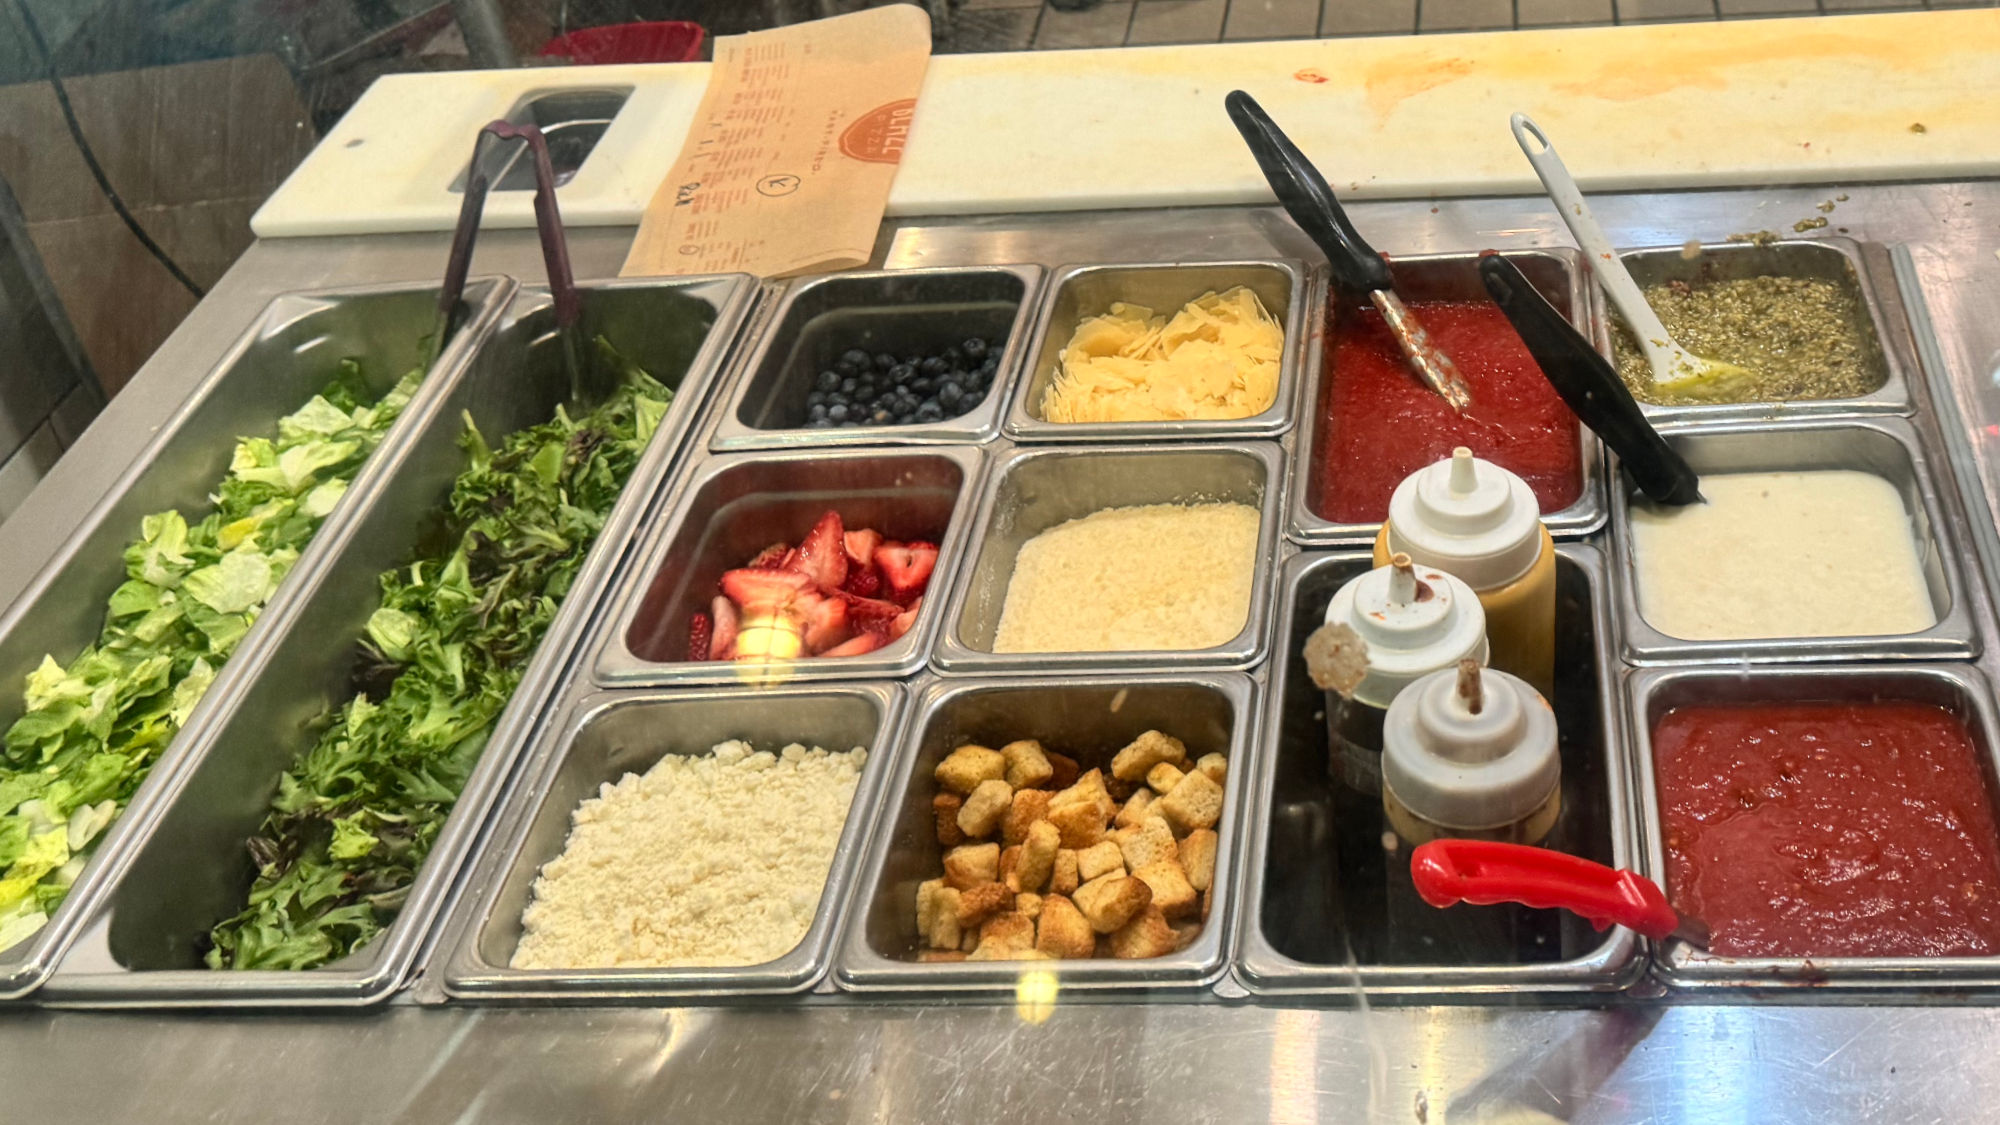 Blaze Pizza Salad and Sauce Section